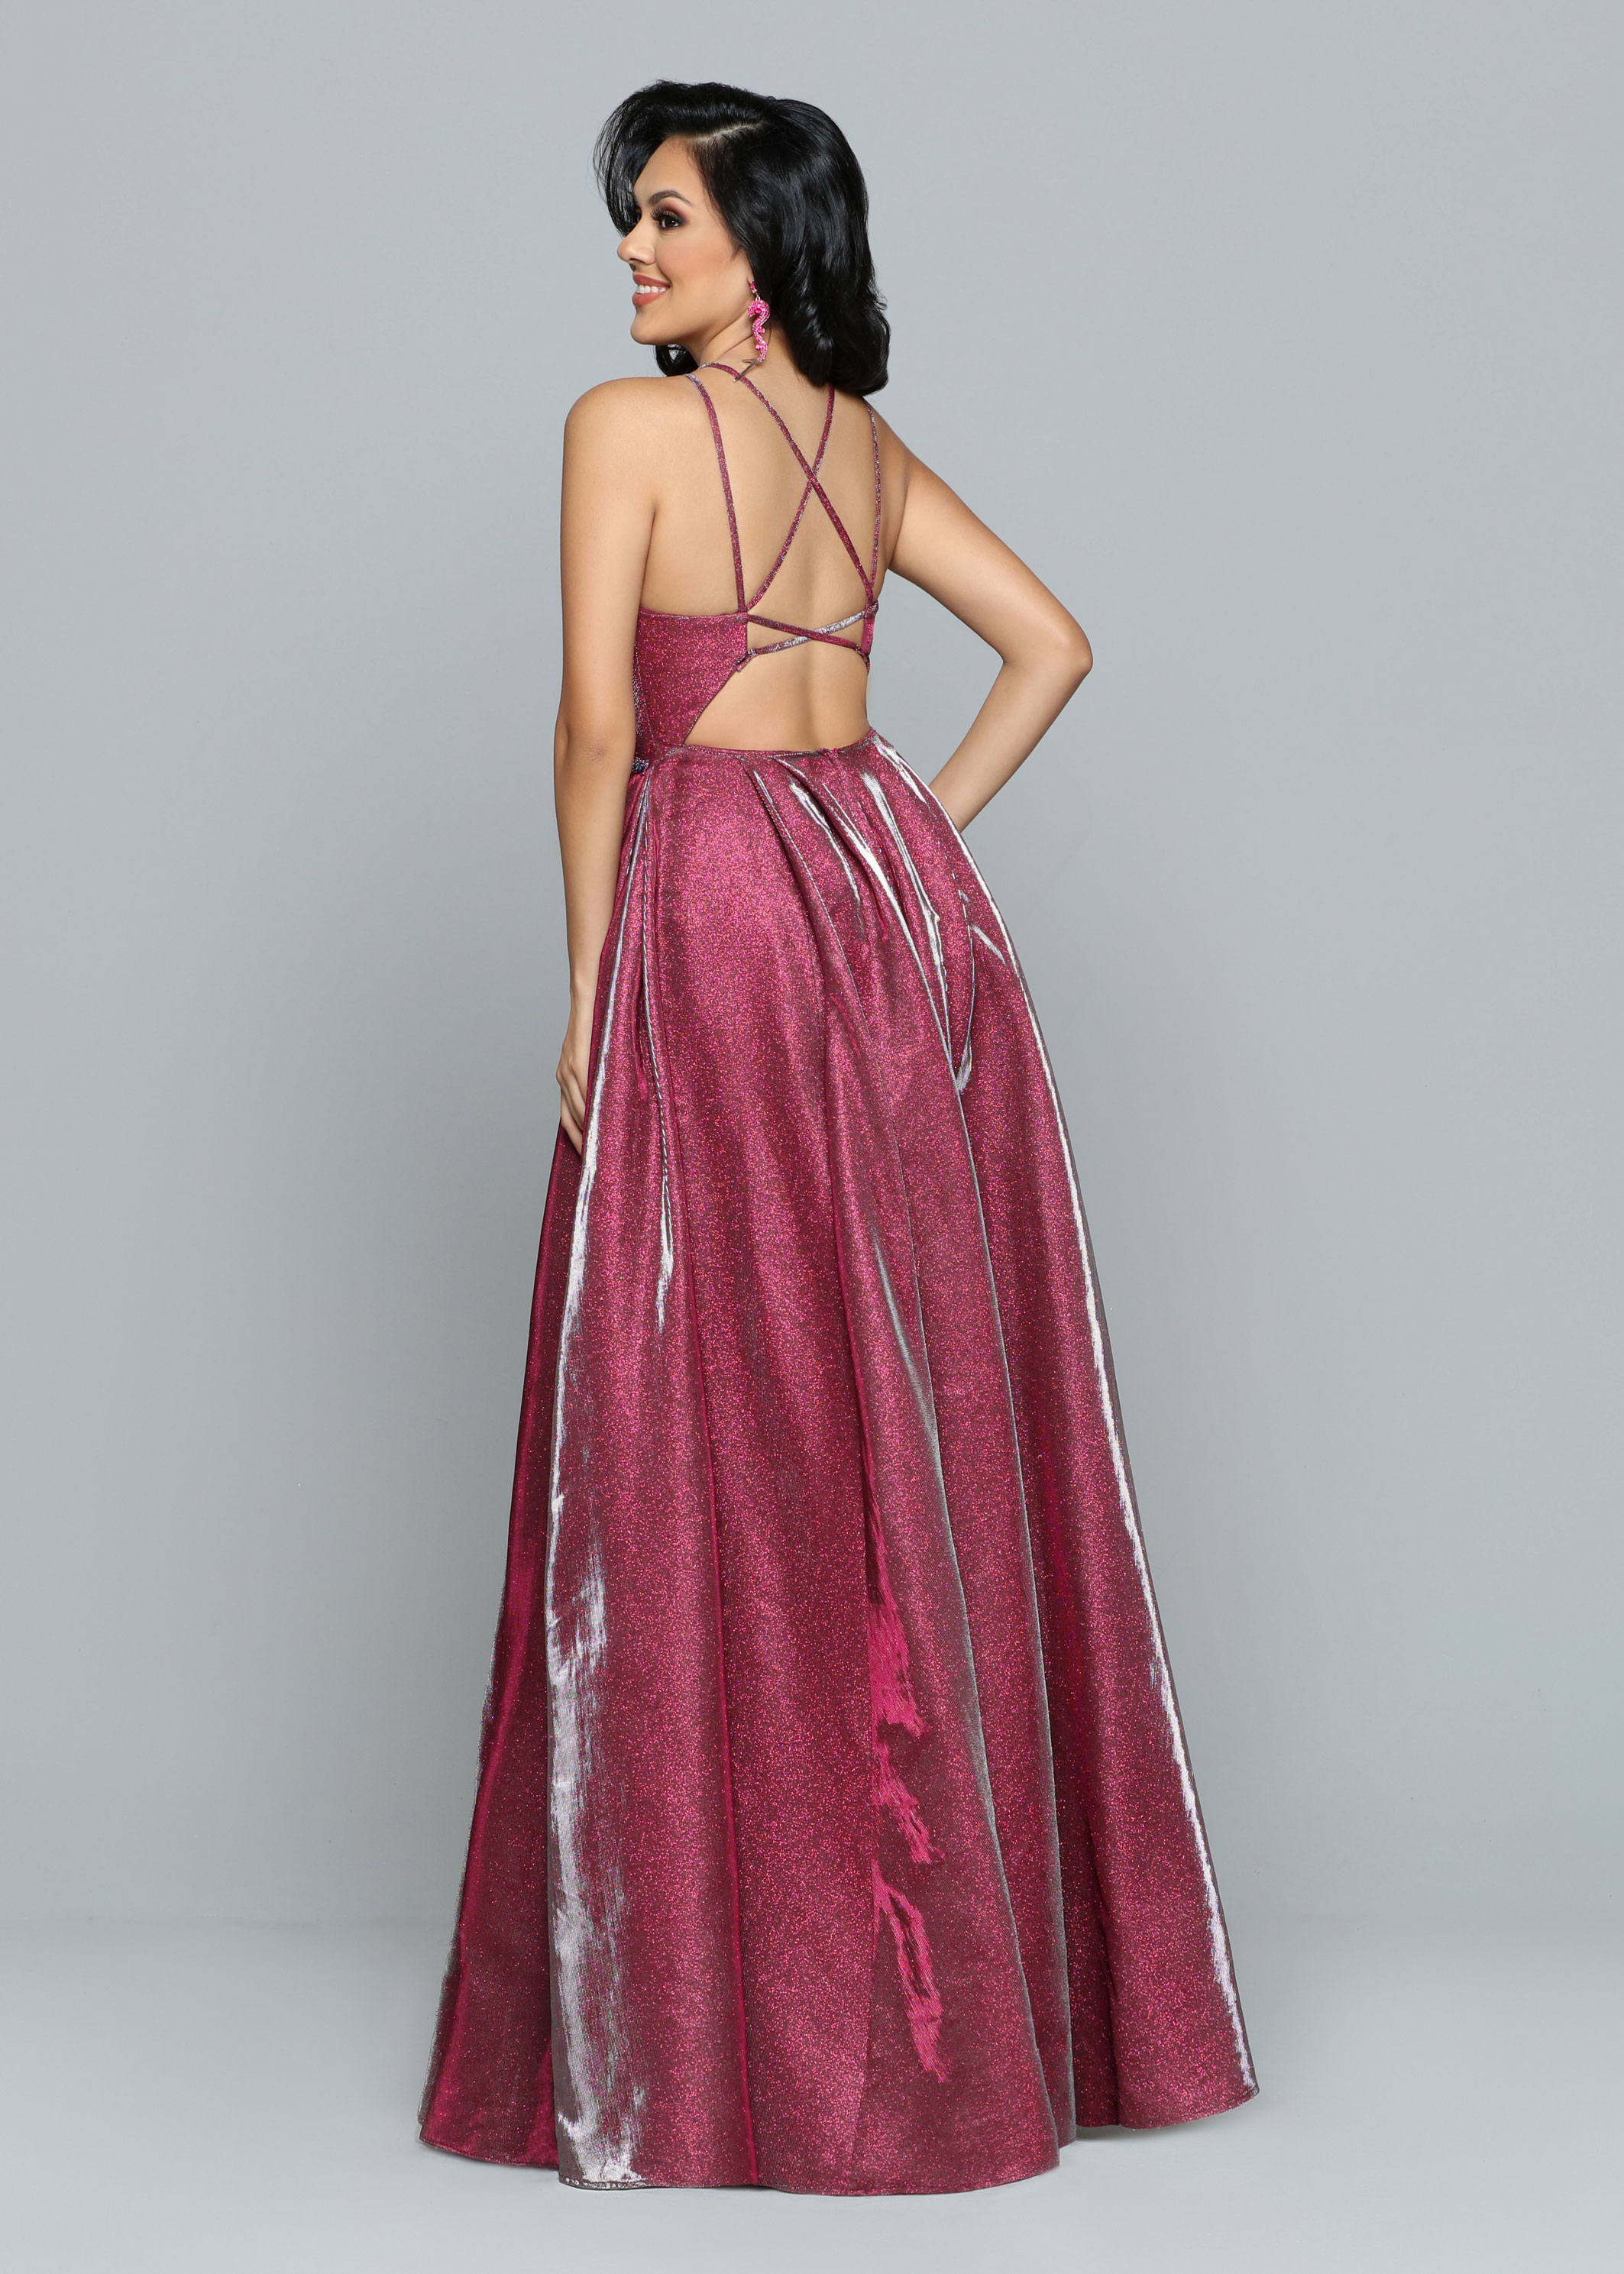 Image showing back view of style #72168